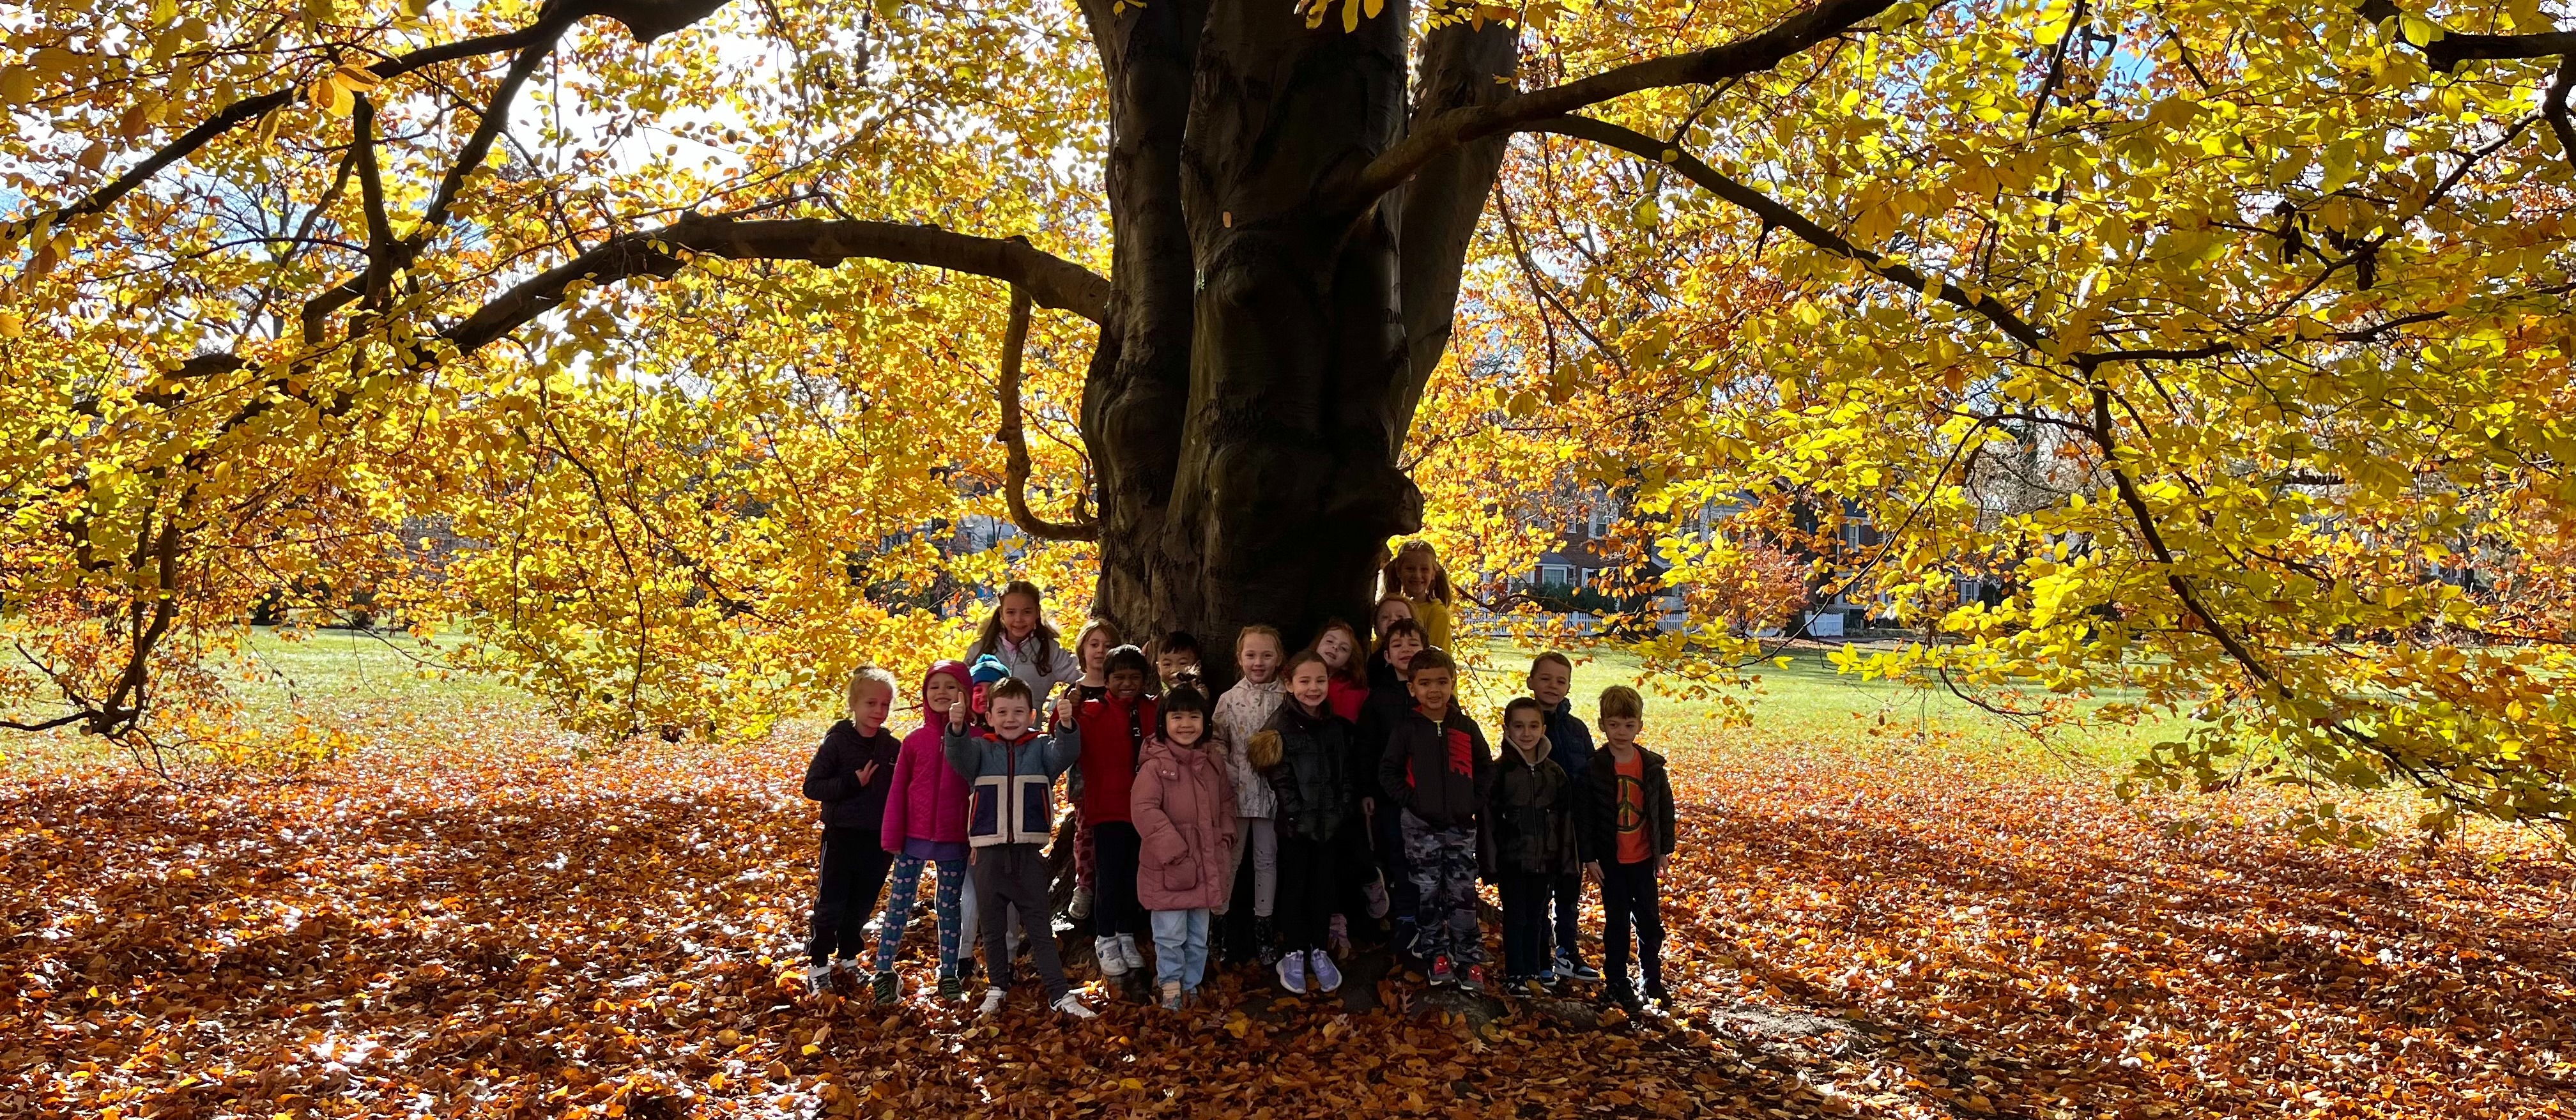 Students by a Fall Tree